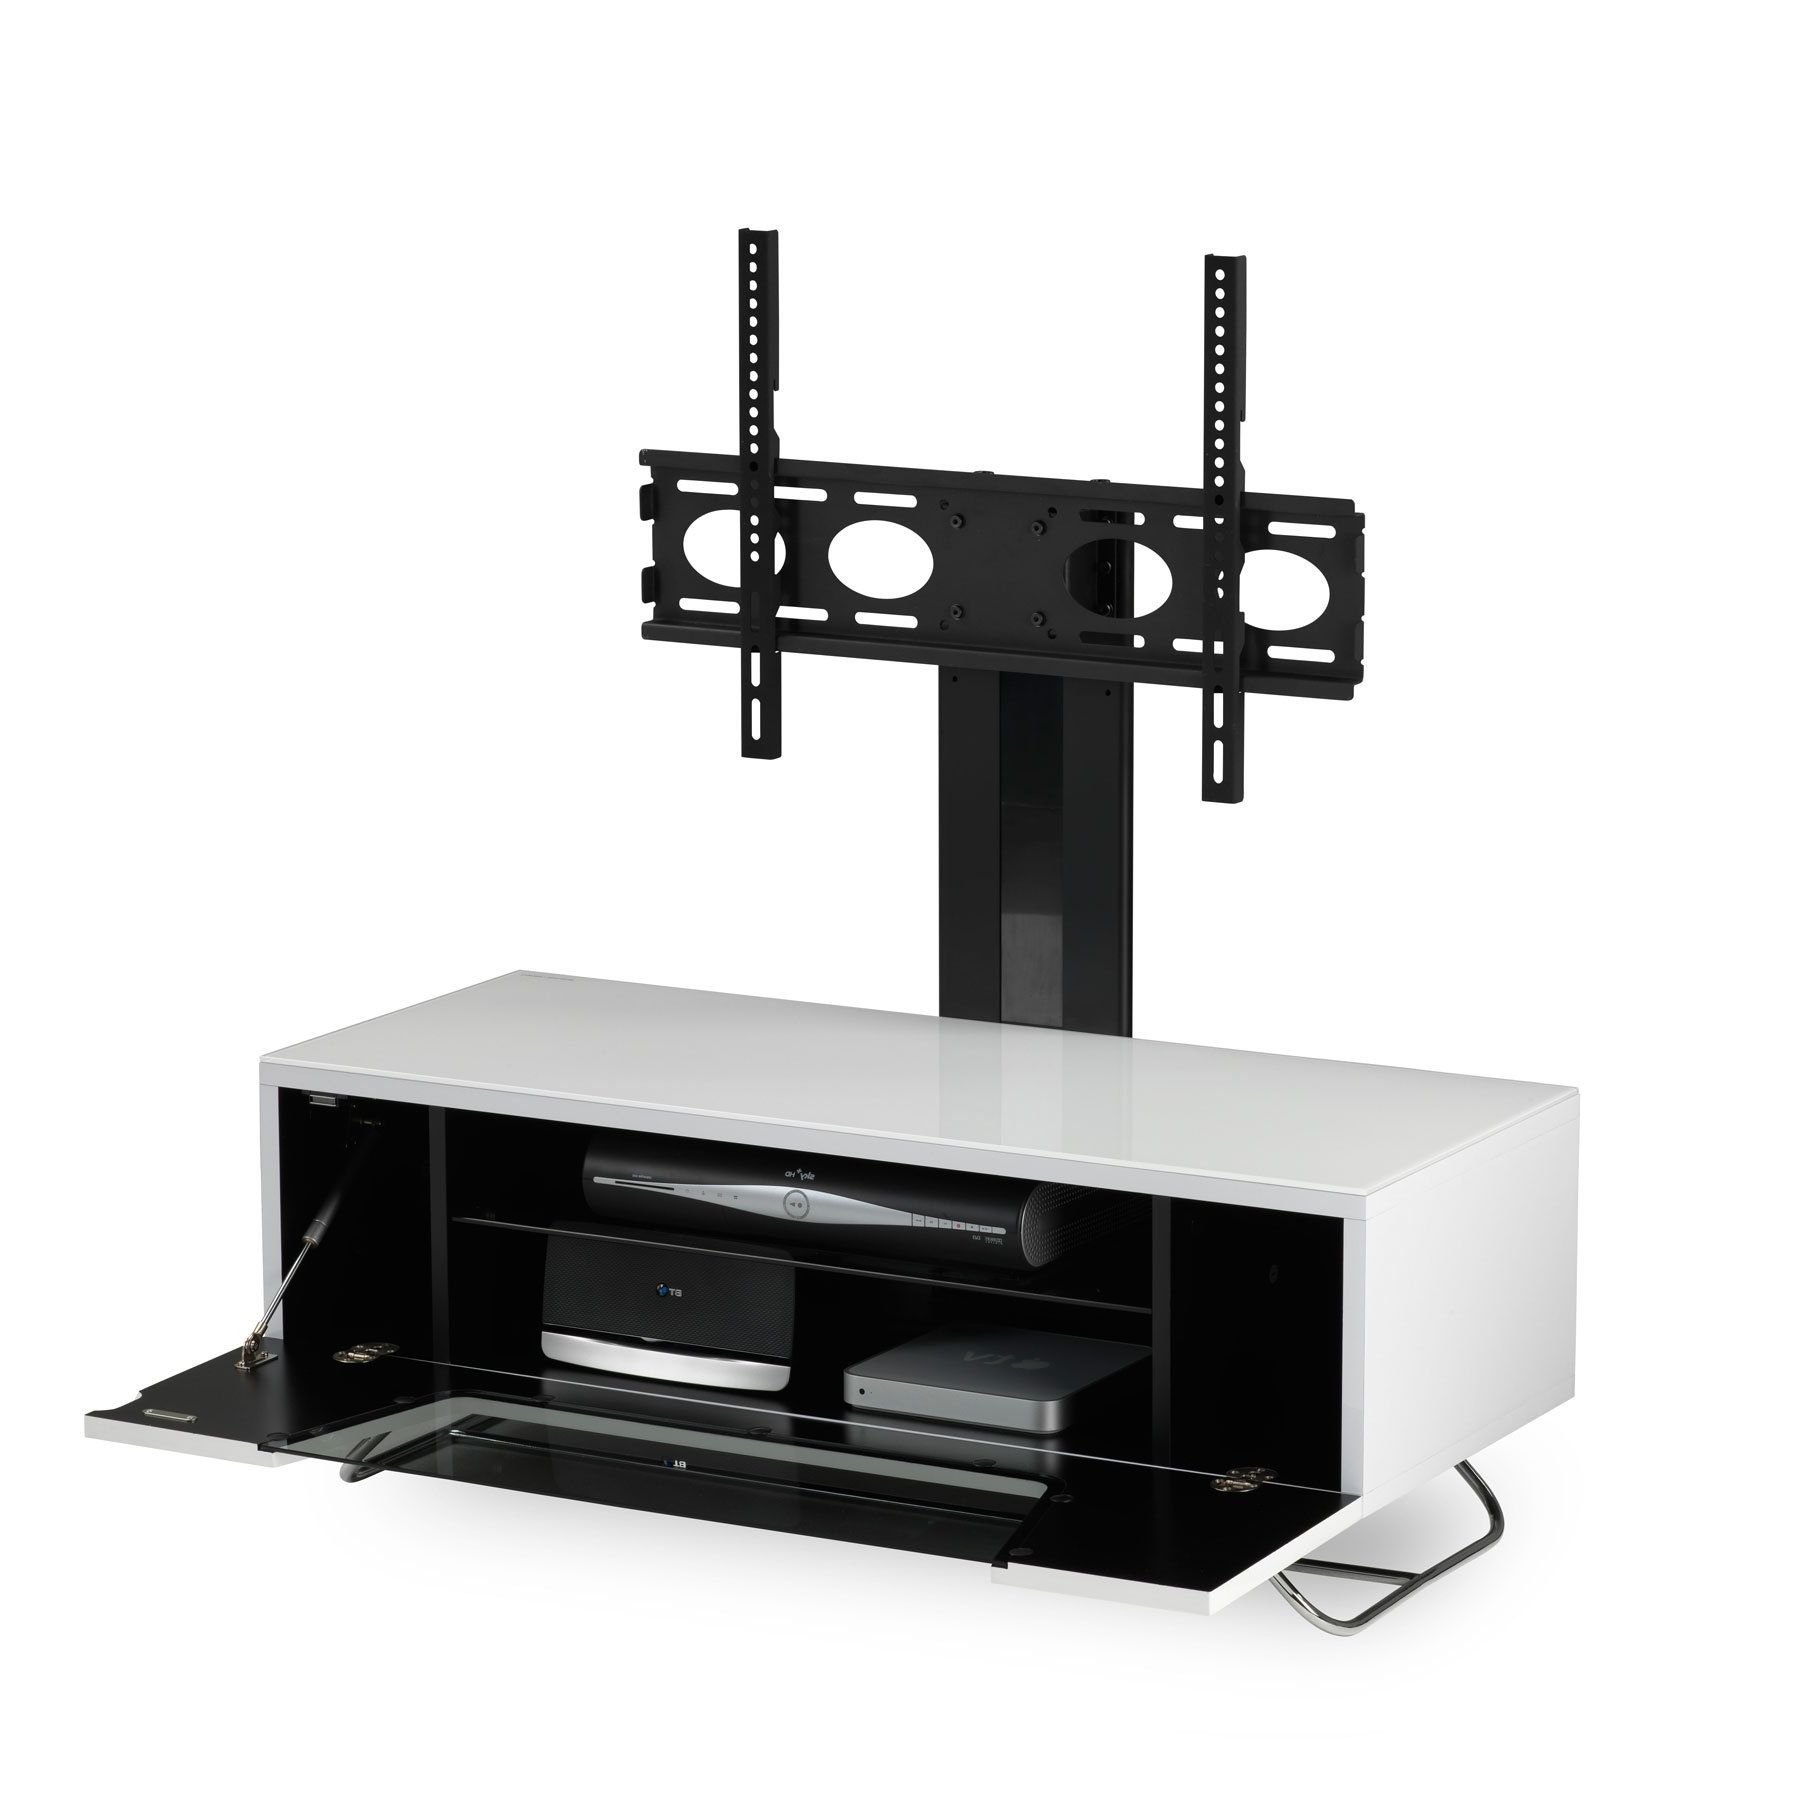 Alphason Chromium 2 100cm White Tv Stand For Up To 50" Tvs Regarding Tv Stands For Tvs Up To 50" (View 12 of 20)